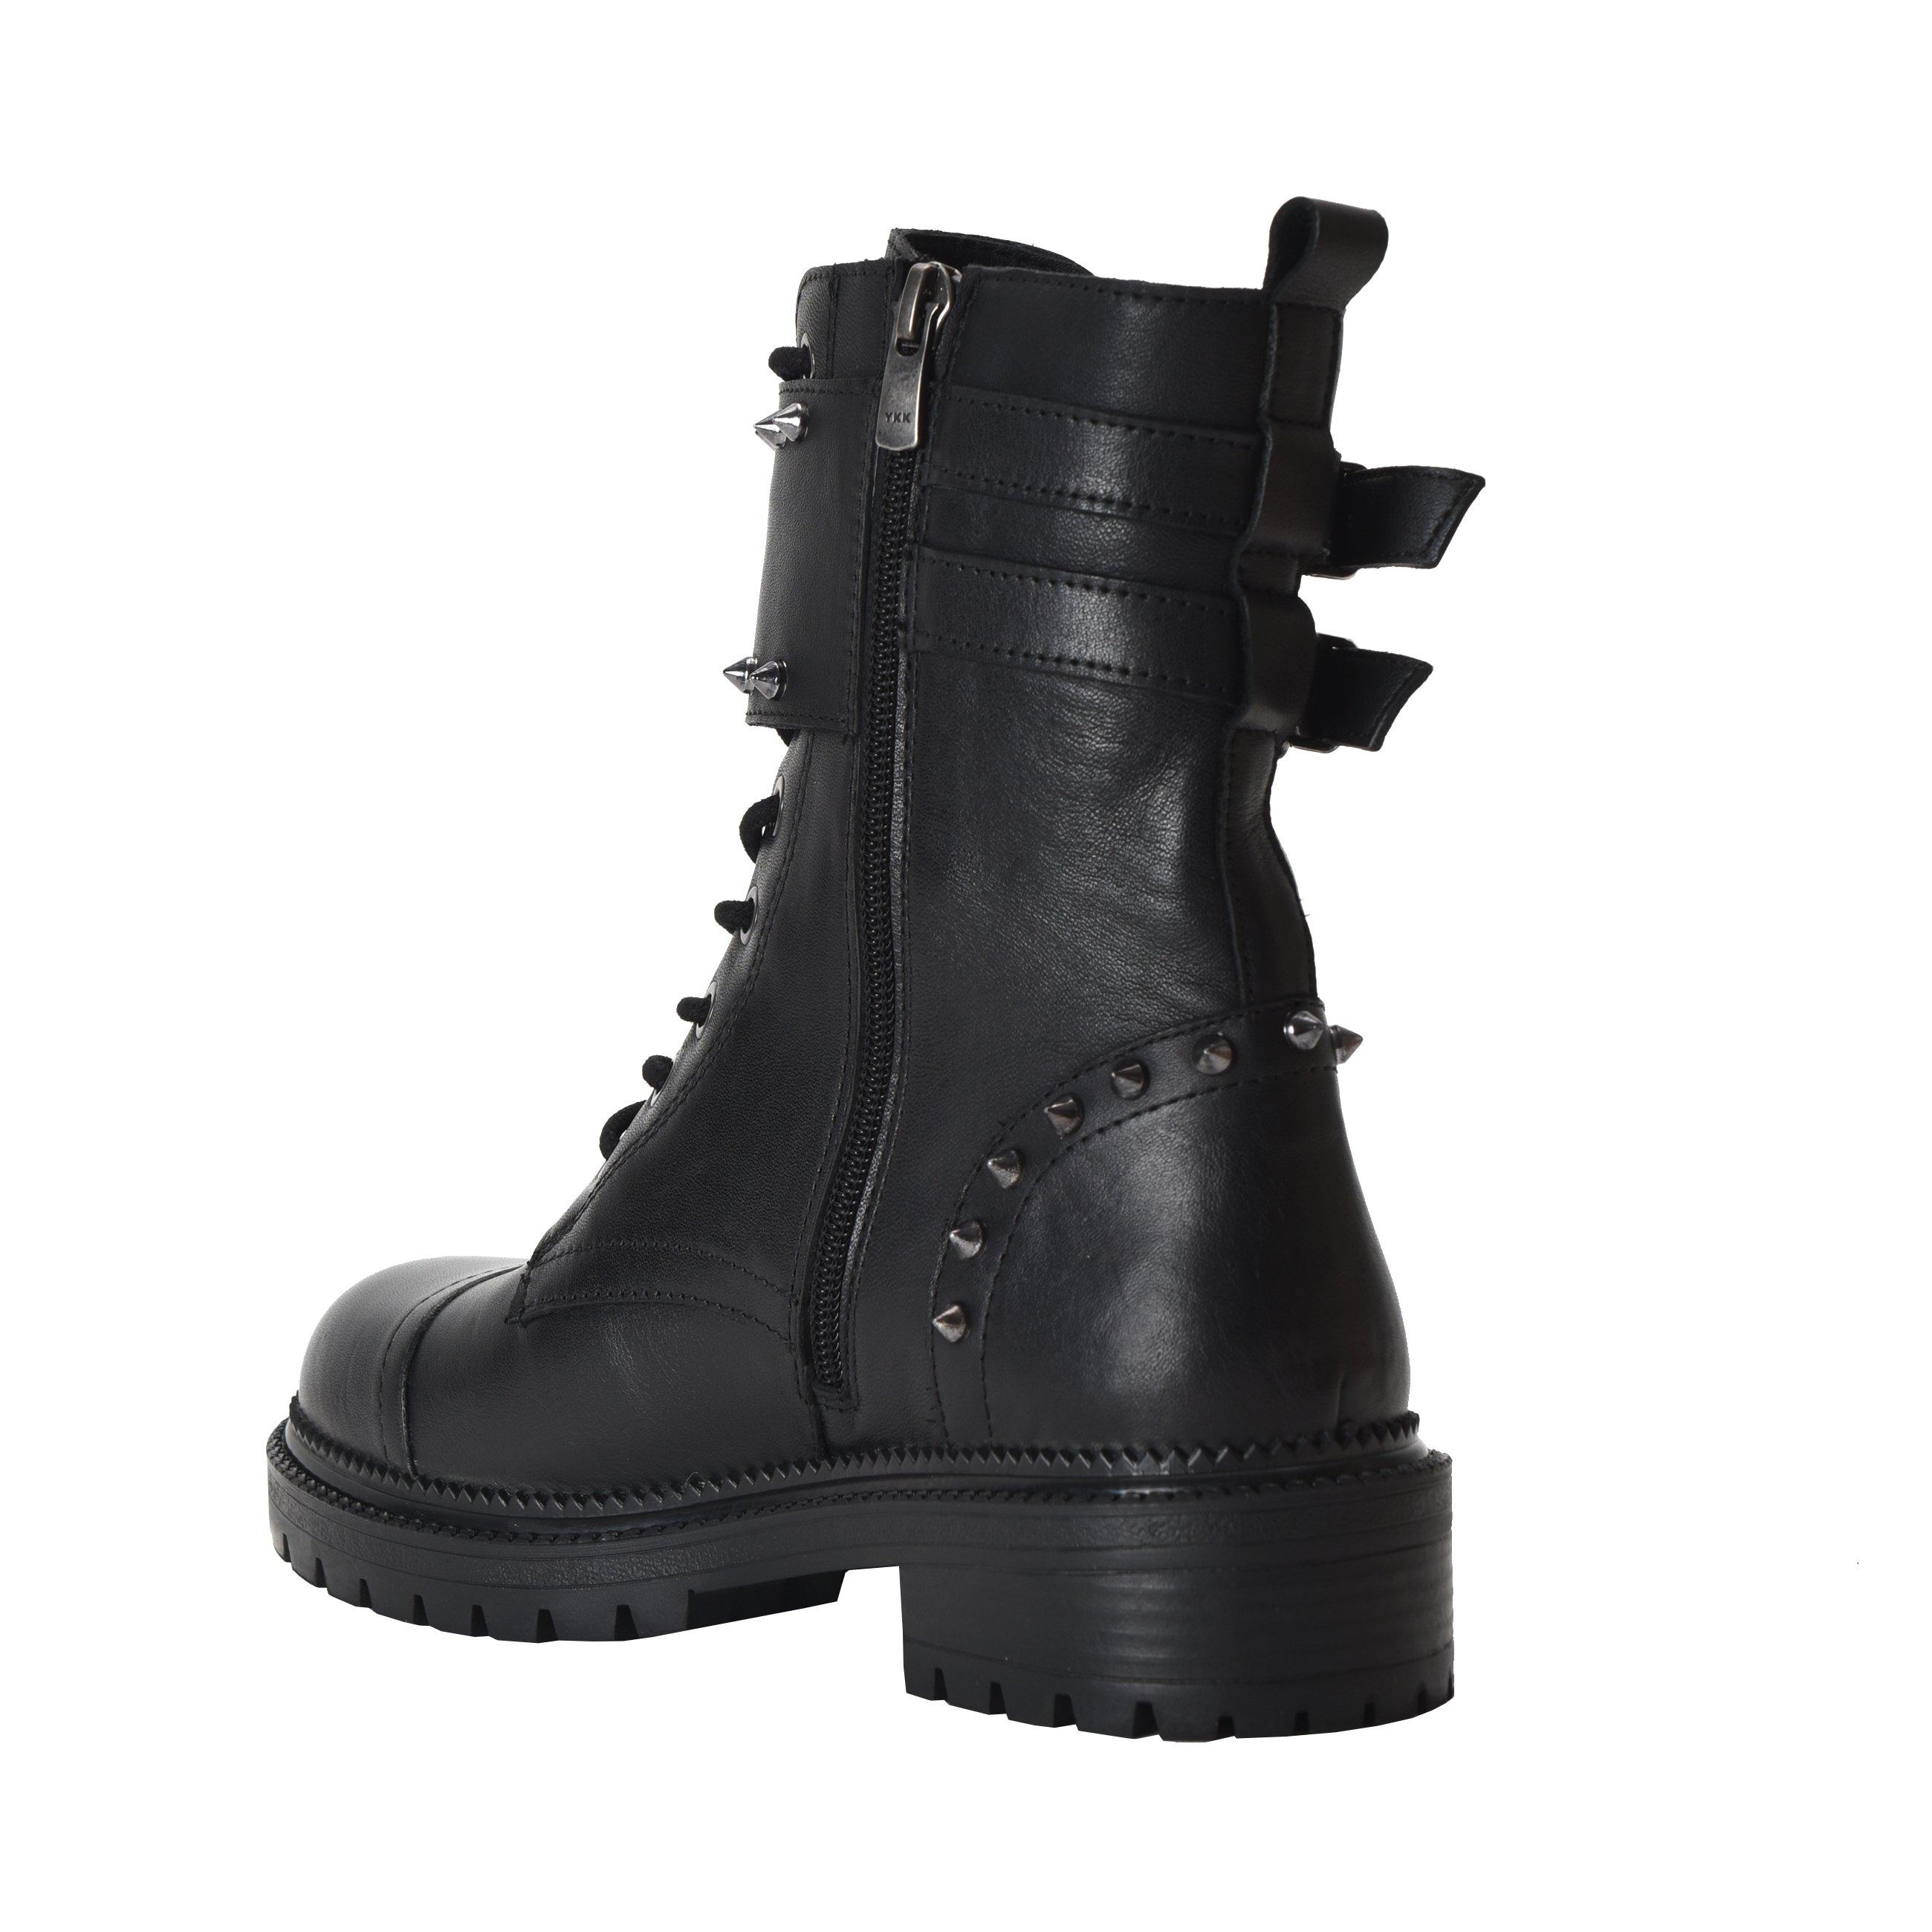 Nine West Collie Studded Combat Lug Sole Boots in Black Leather (Black) -  Lyst